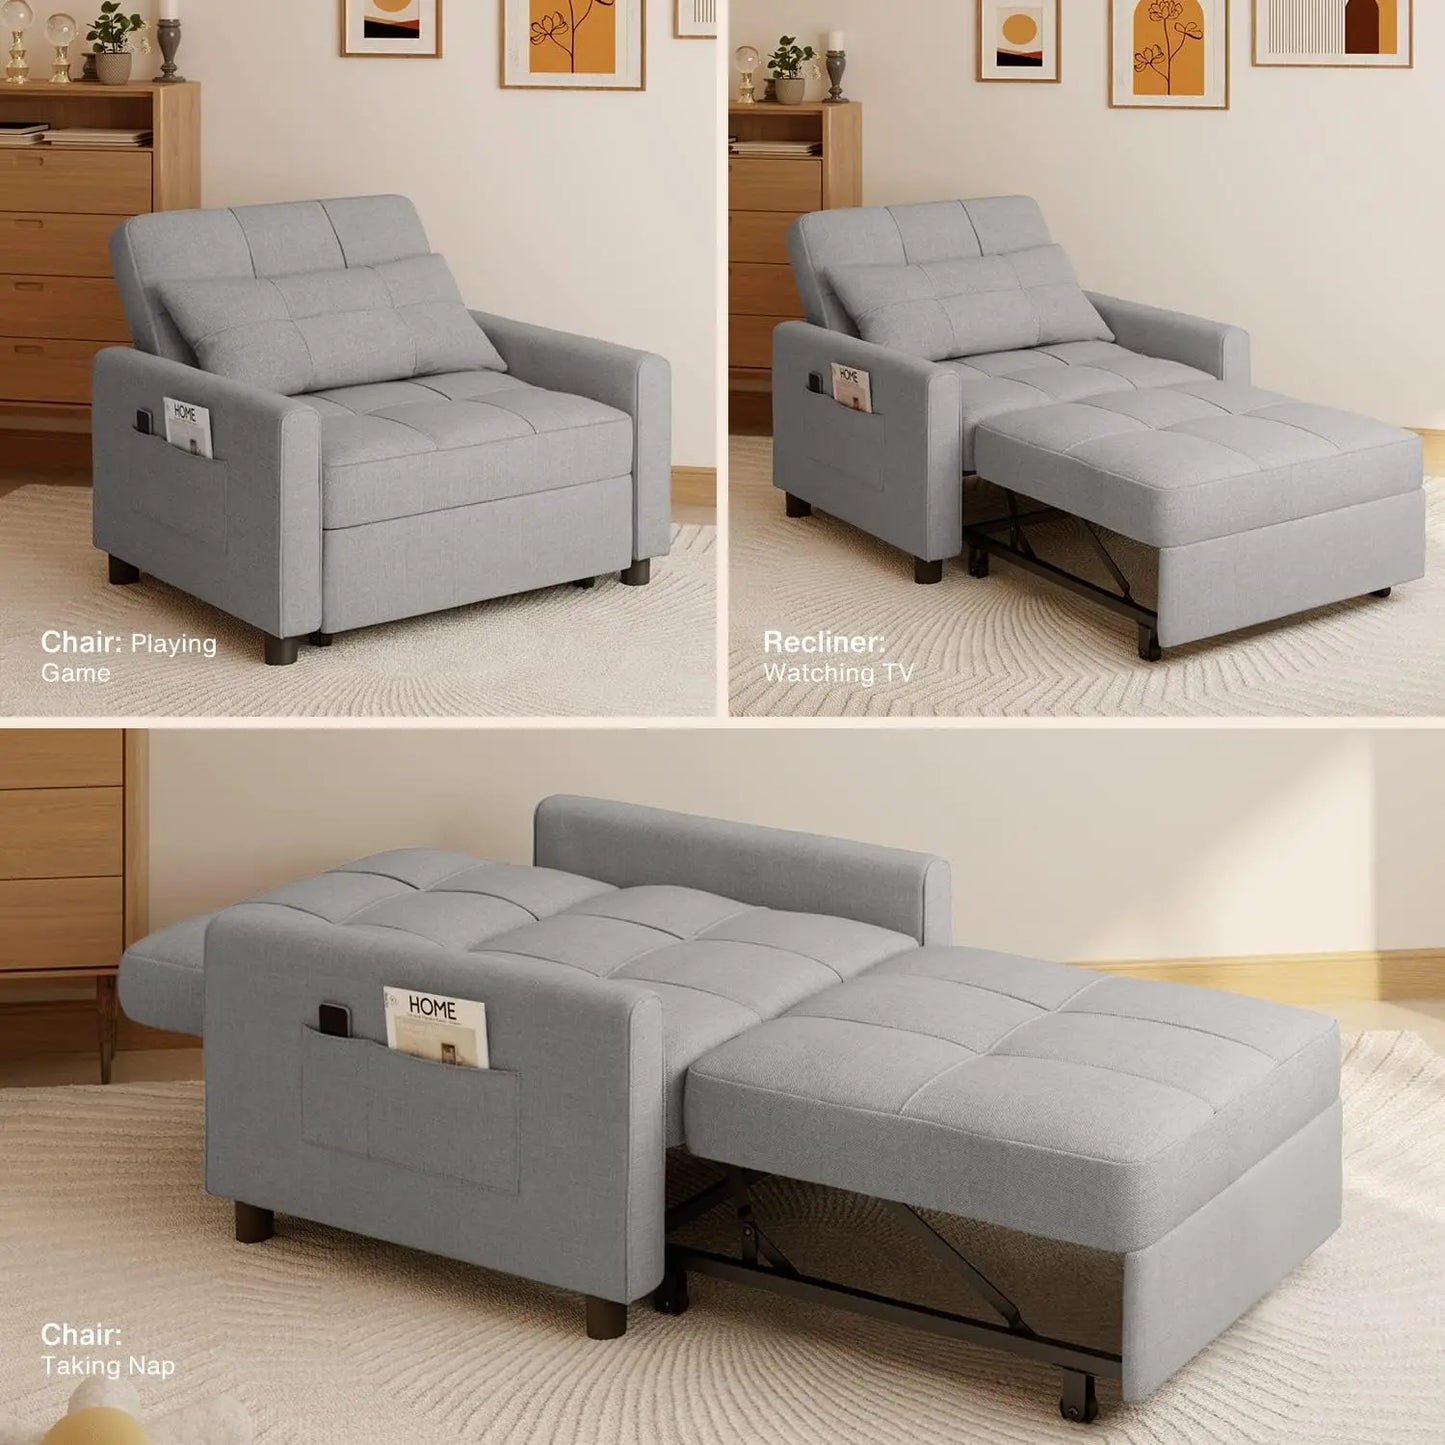 Adjustable Sleeper Chair Pullout Sofa Bed - Easier Life Emporium